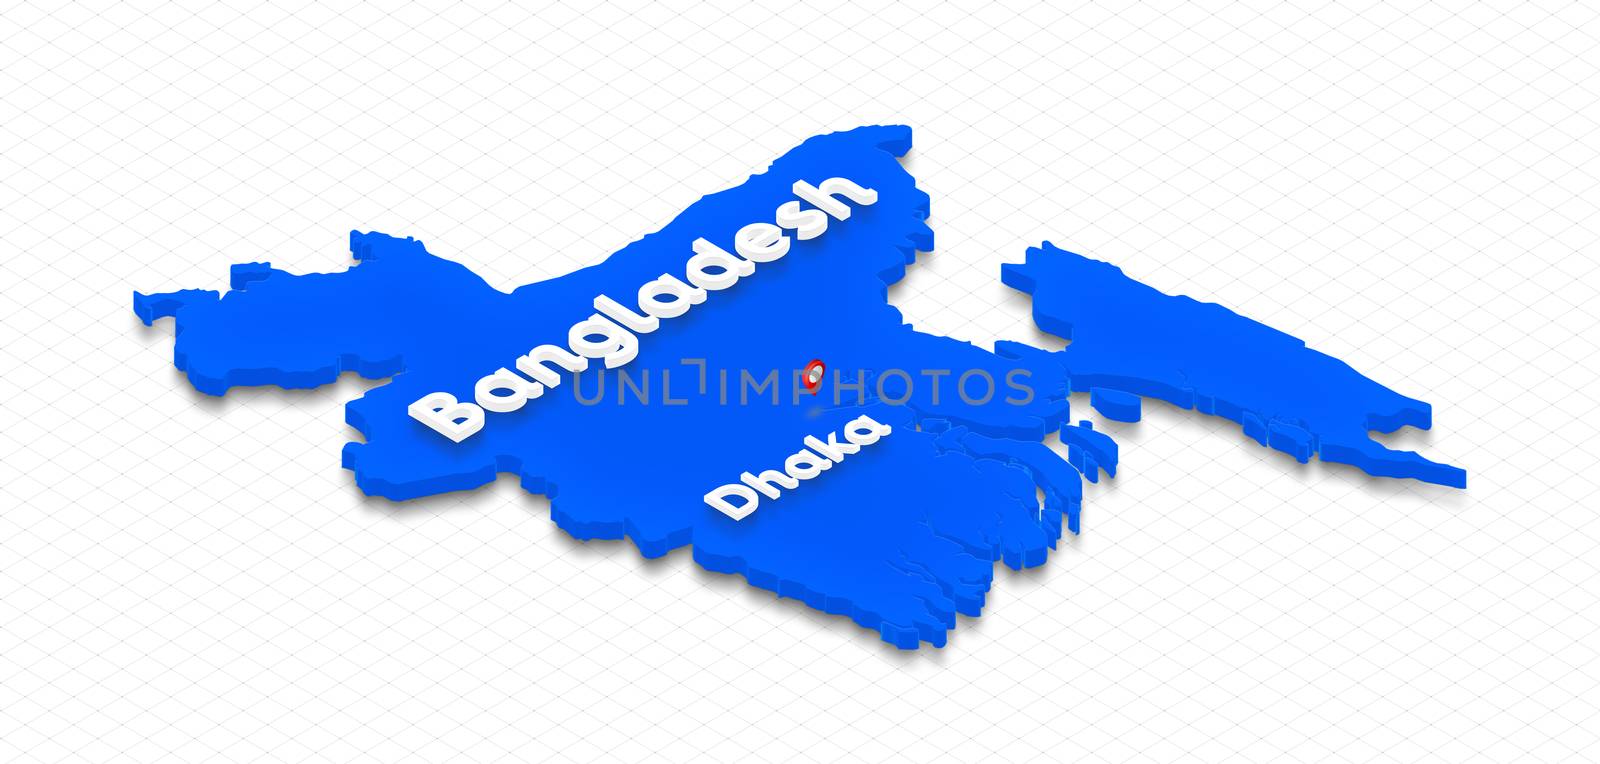 Illustration of a blue ground map of Bangladesh on grid background. Right 3D isometric perspective projection with the name of country and capital Dhaka.